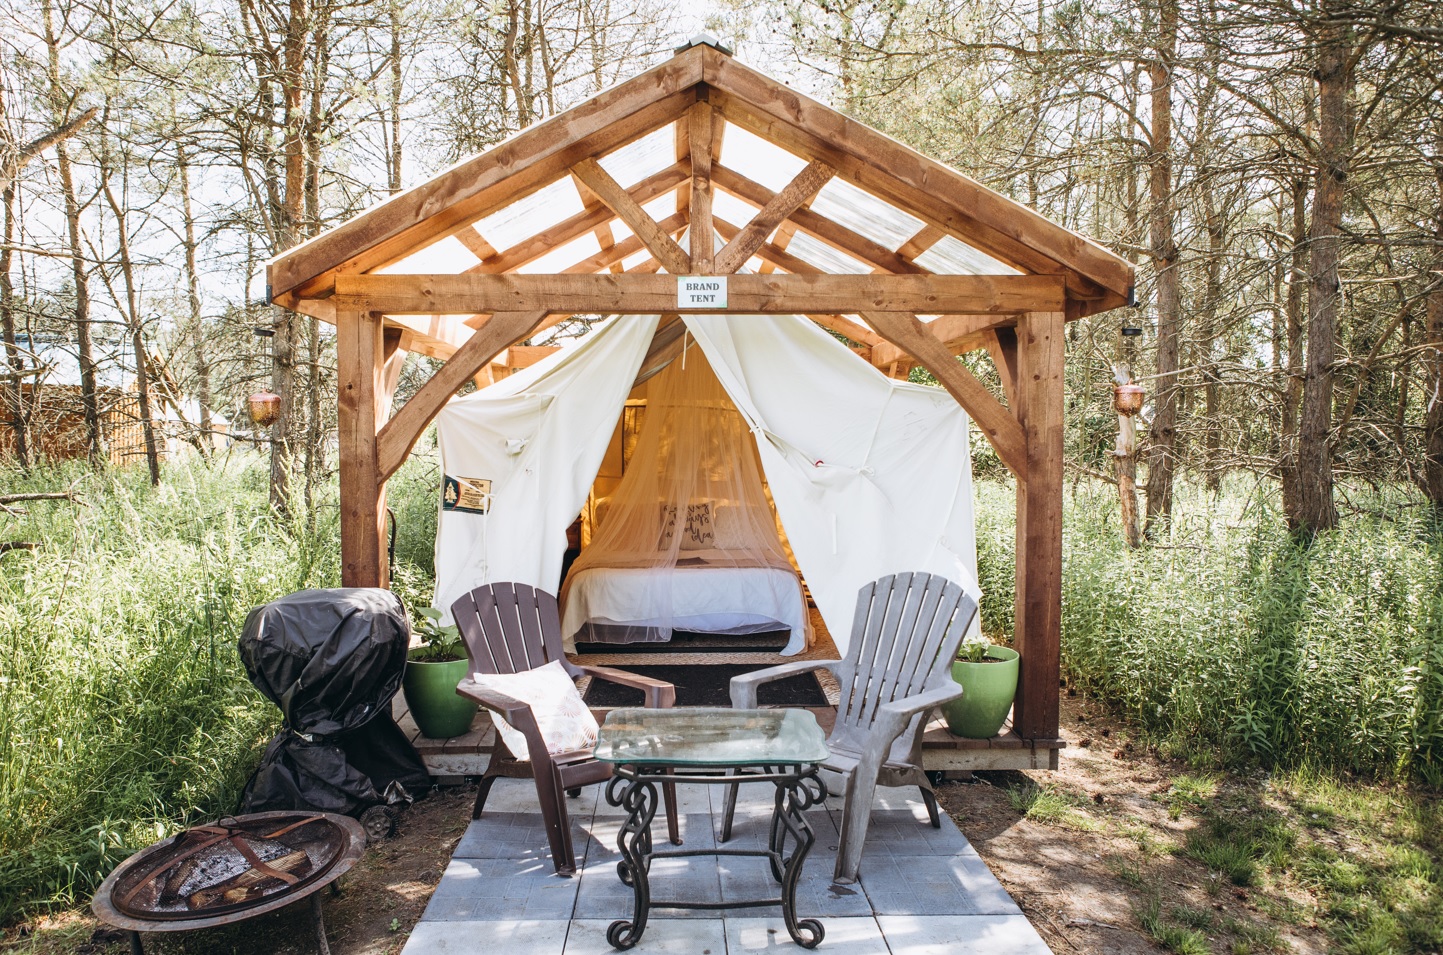 Brand Tent: A Unique Glamping Experience